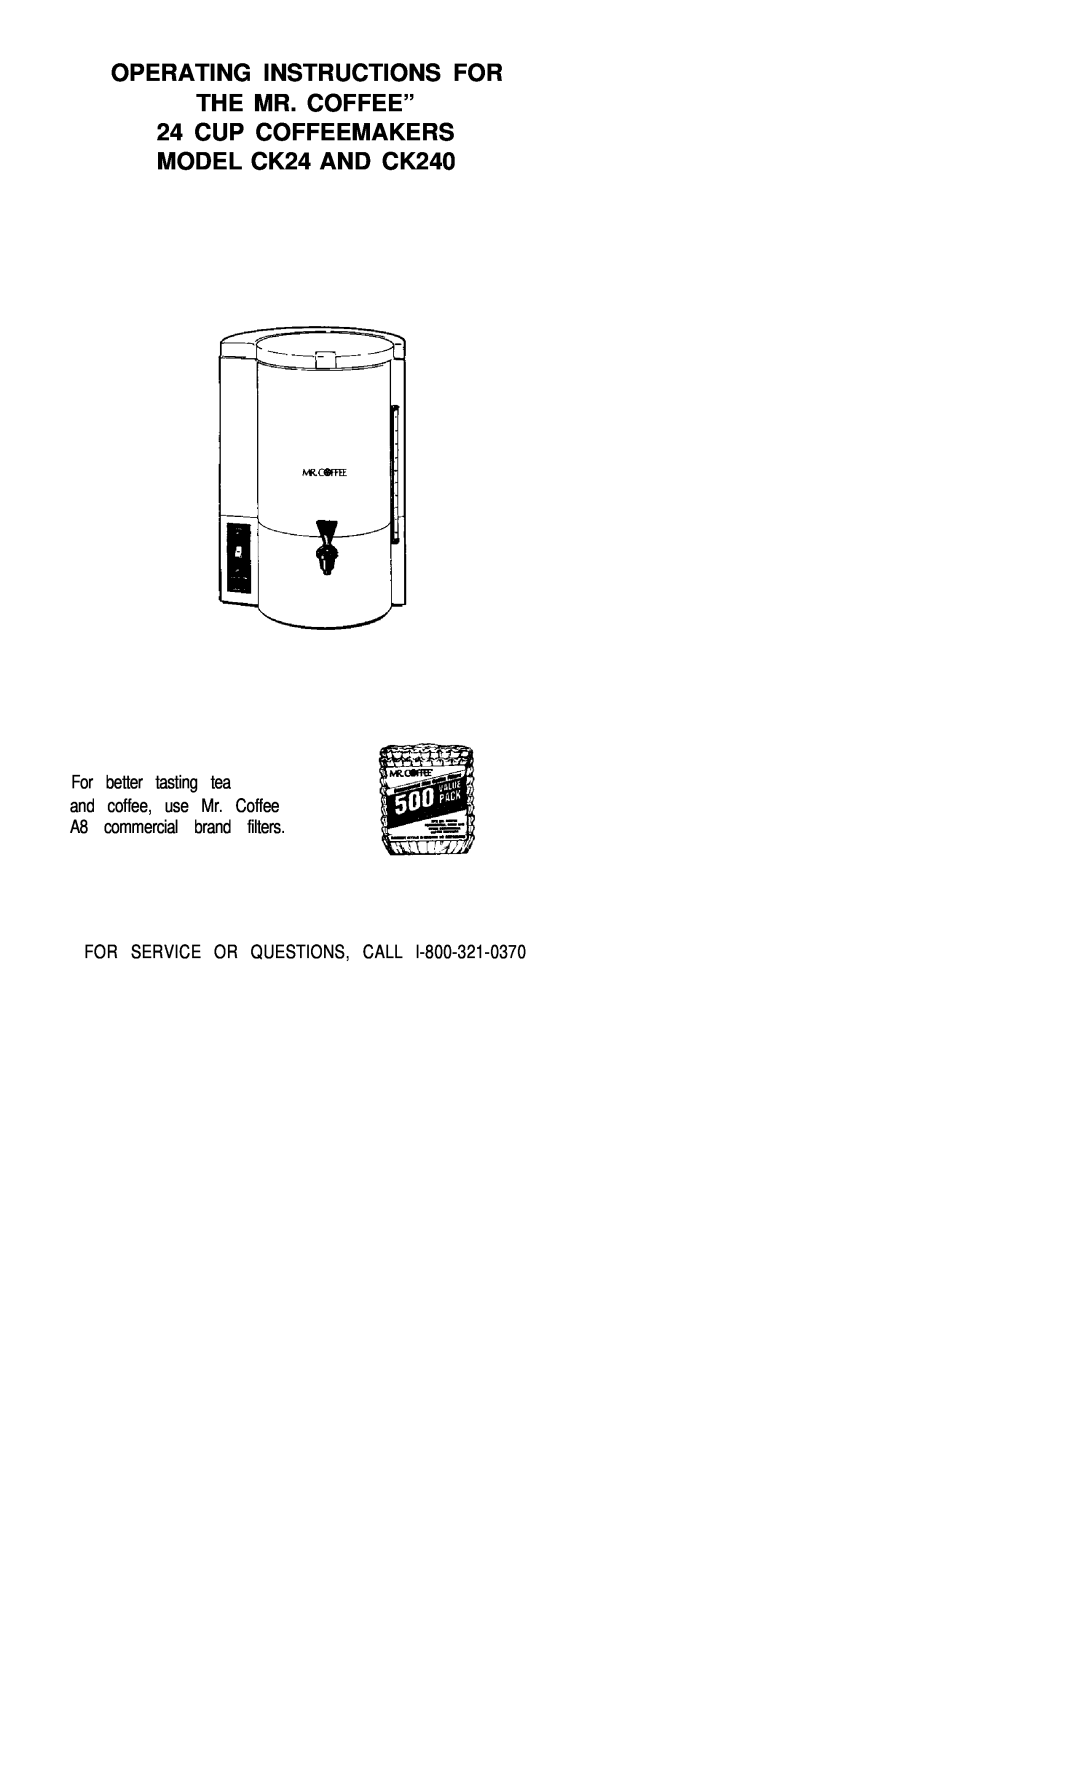 Mr. Coffee manual Operating Instructions For The Mr. Coffee”, CUP COFFEEMAKERS MODEL CK24 AND CK240 